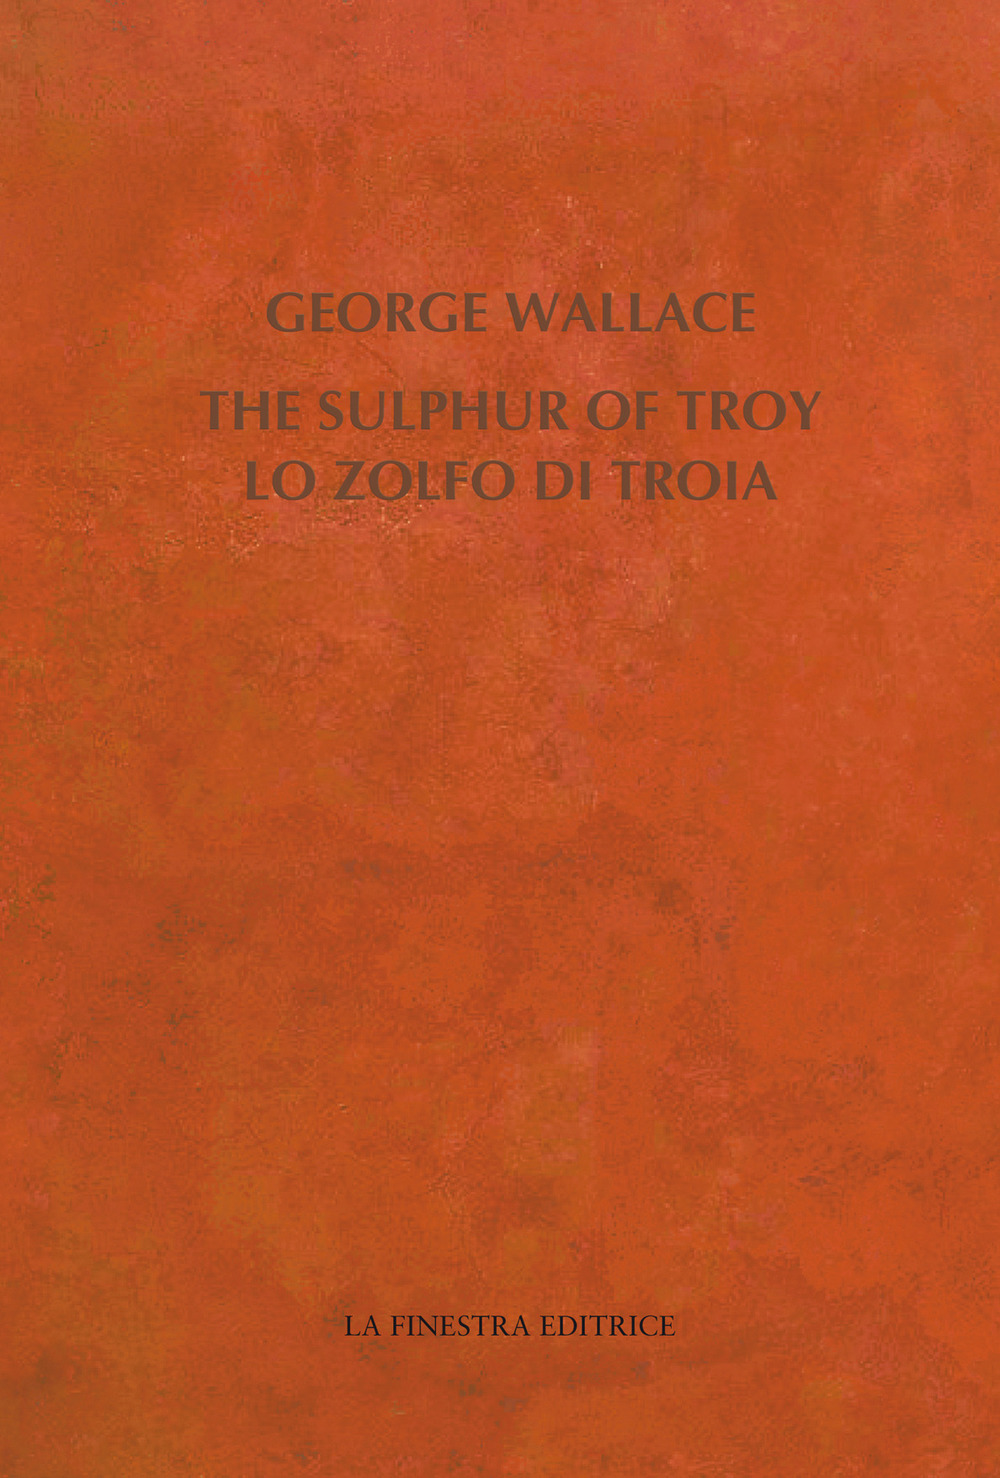 The Sulphur of Troy. Selected Poems 2004-2017. Testo inglese a fronte